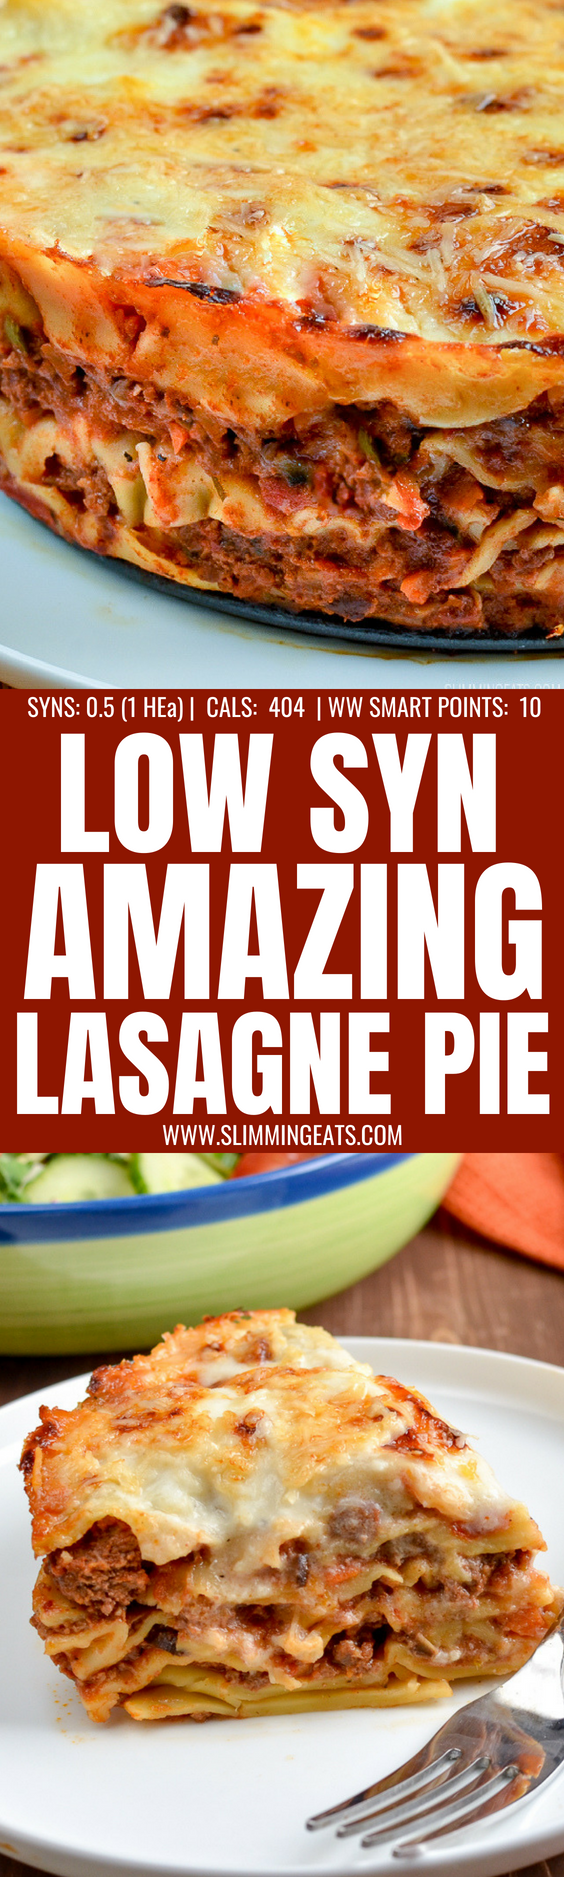 The Ultimate Low Syn Lasagne Pie - a firm family favourite that can be cooked in the Instant Pot or an oven.  | Slimming World and Weight Watchers friendly